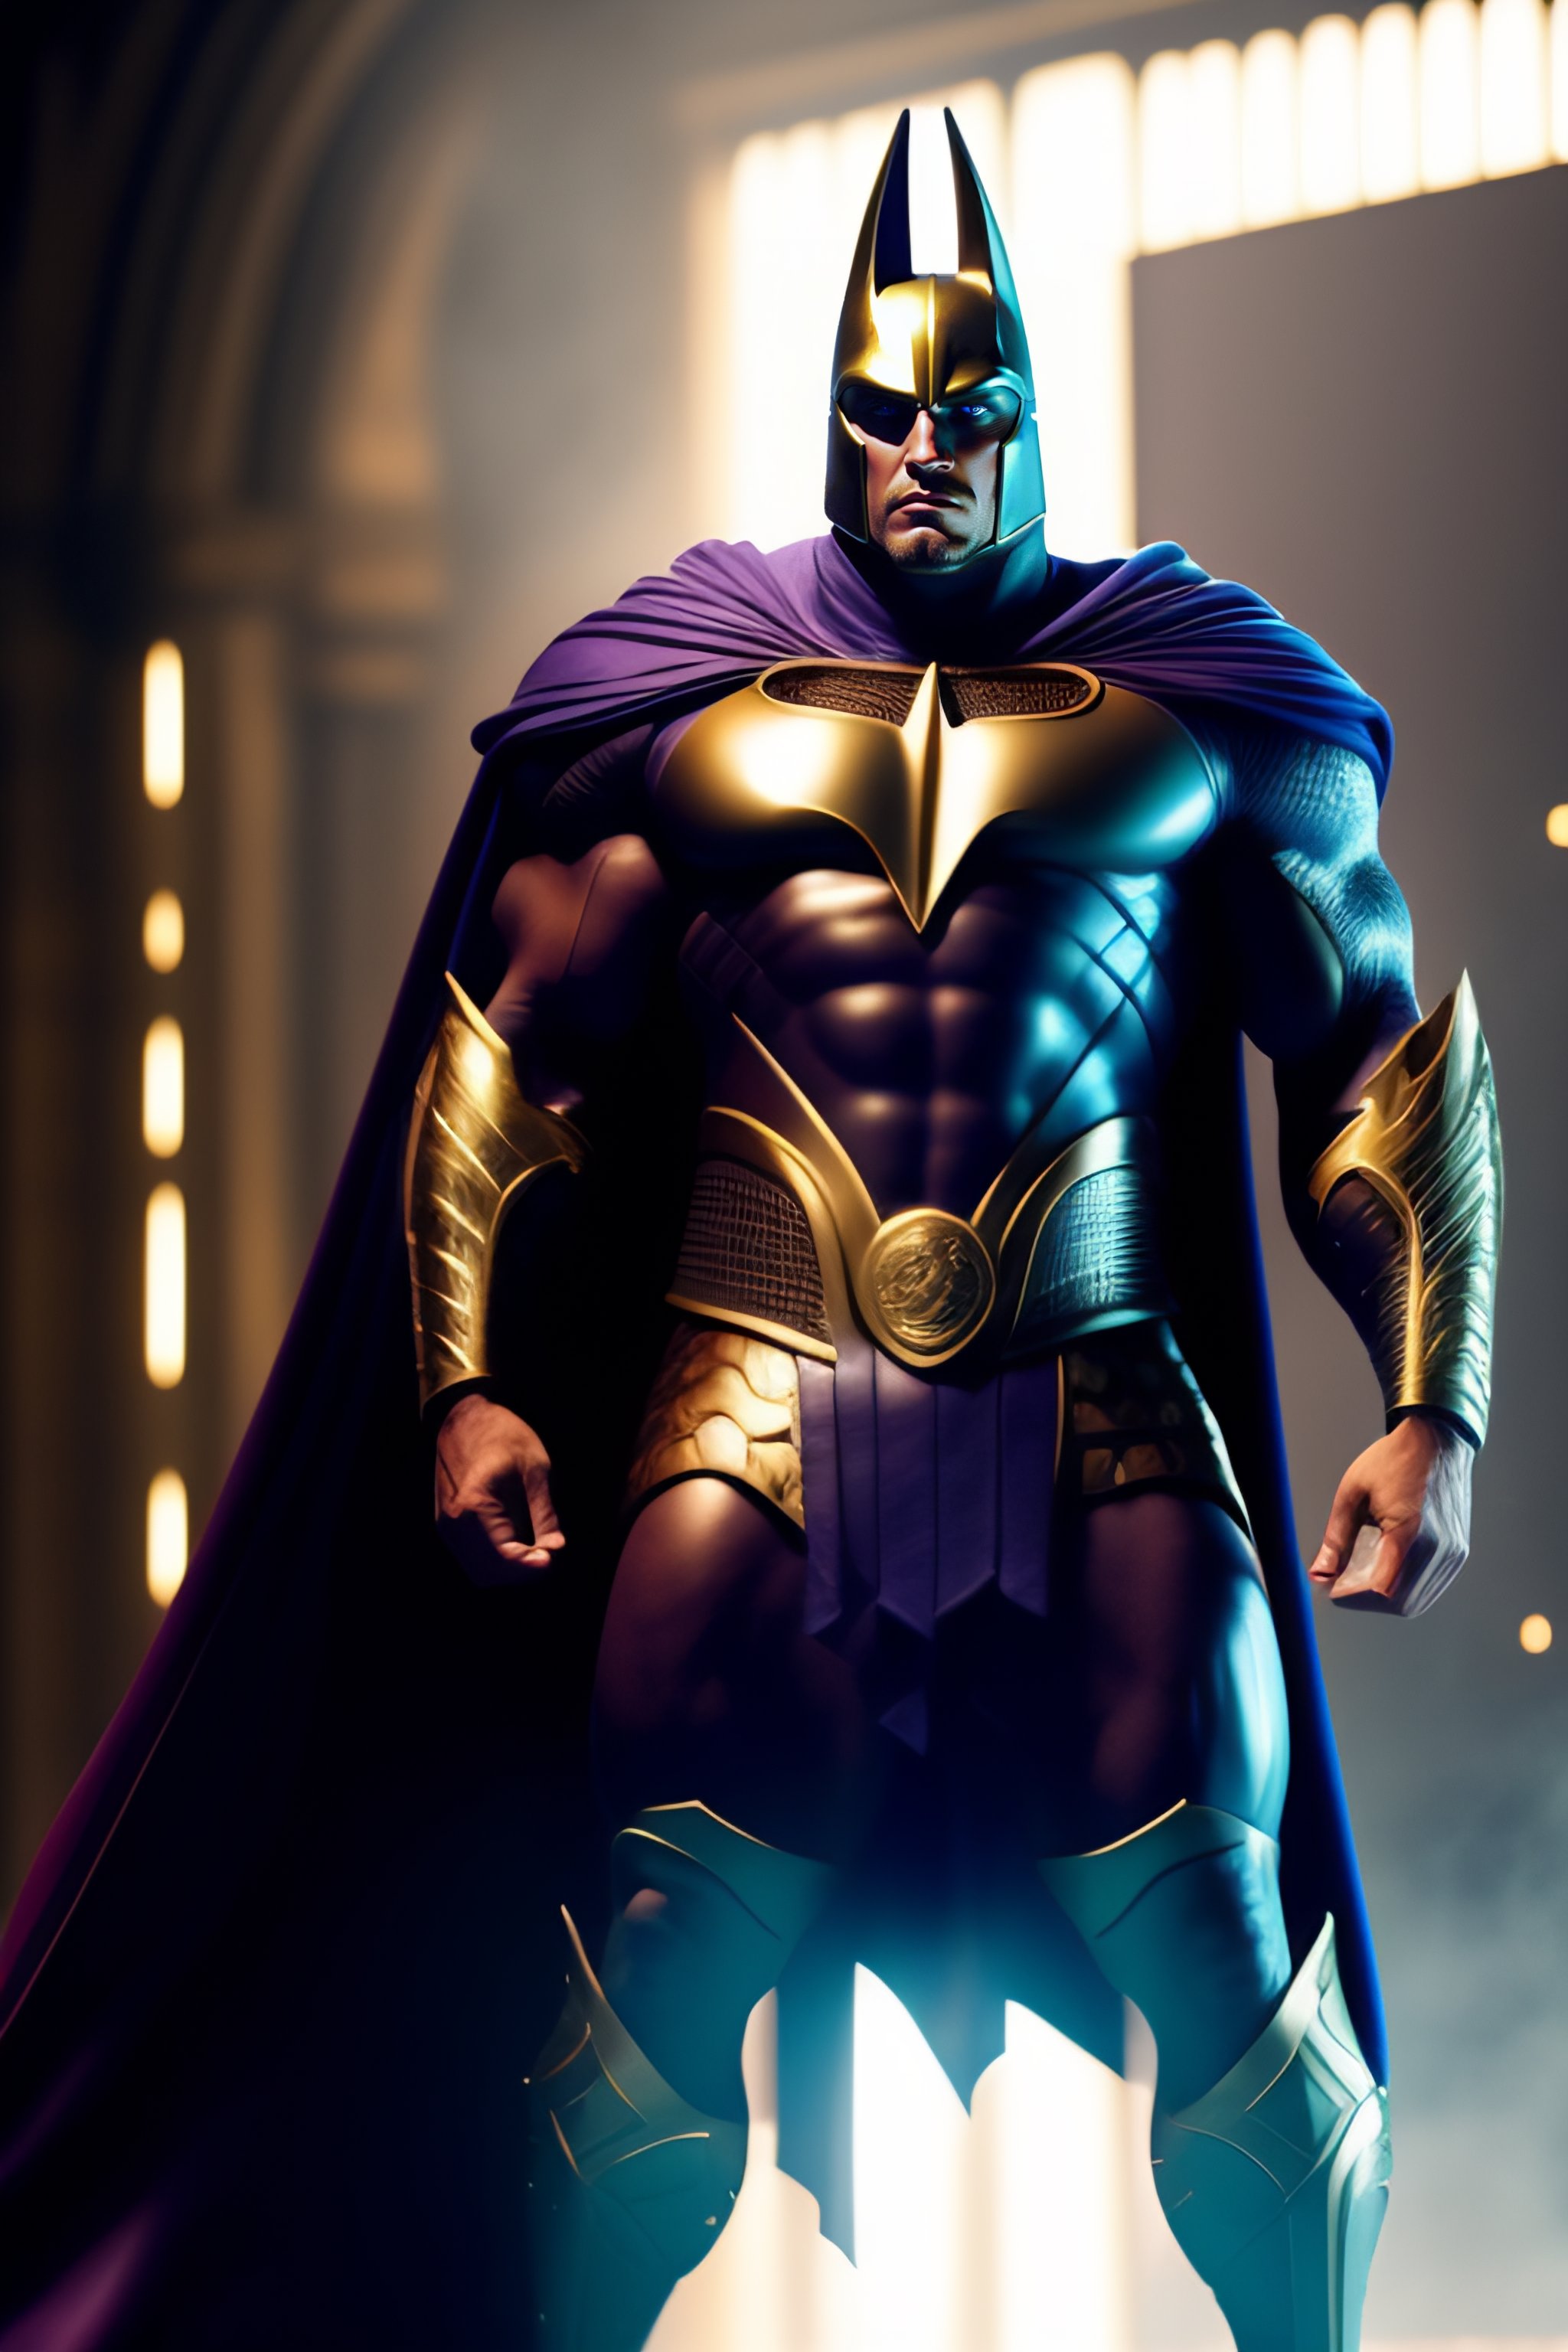 Lexica - Zeus as thor with batsuit in batman movie, full body